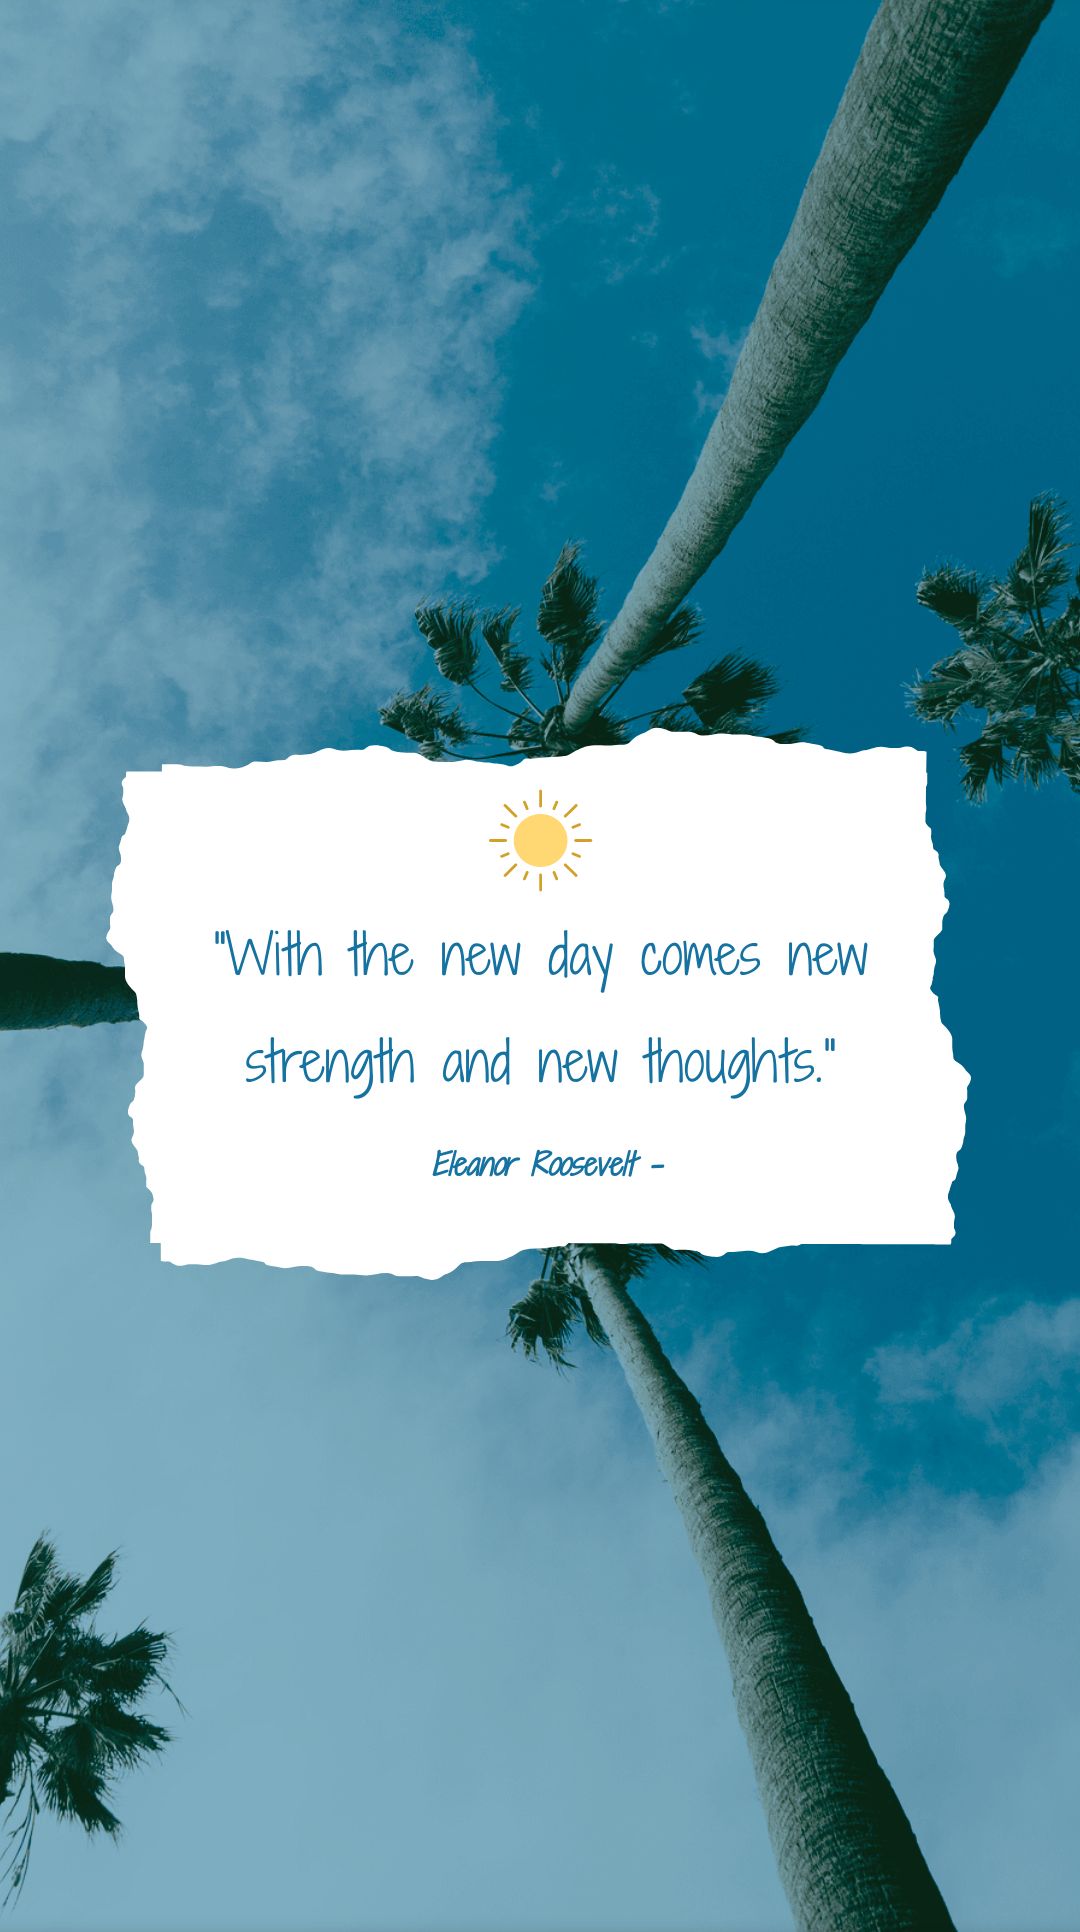 Eleanor Roosevelt - With the new day comes new strength and new thoughts.